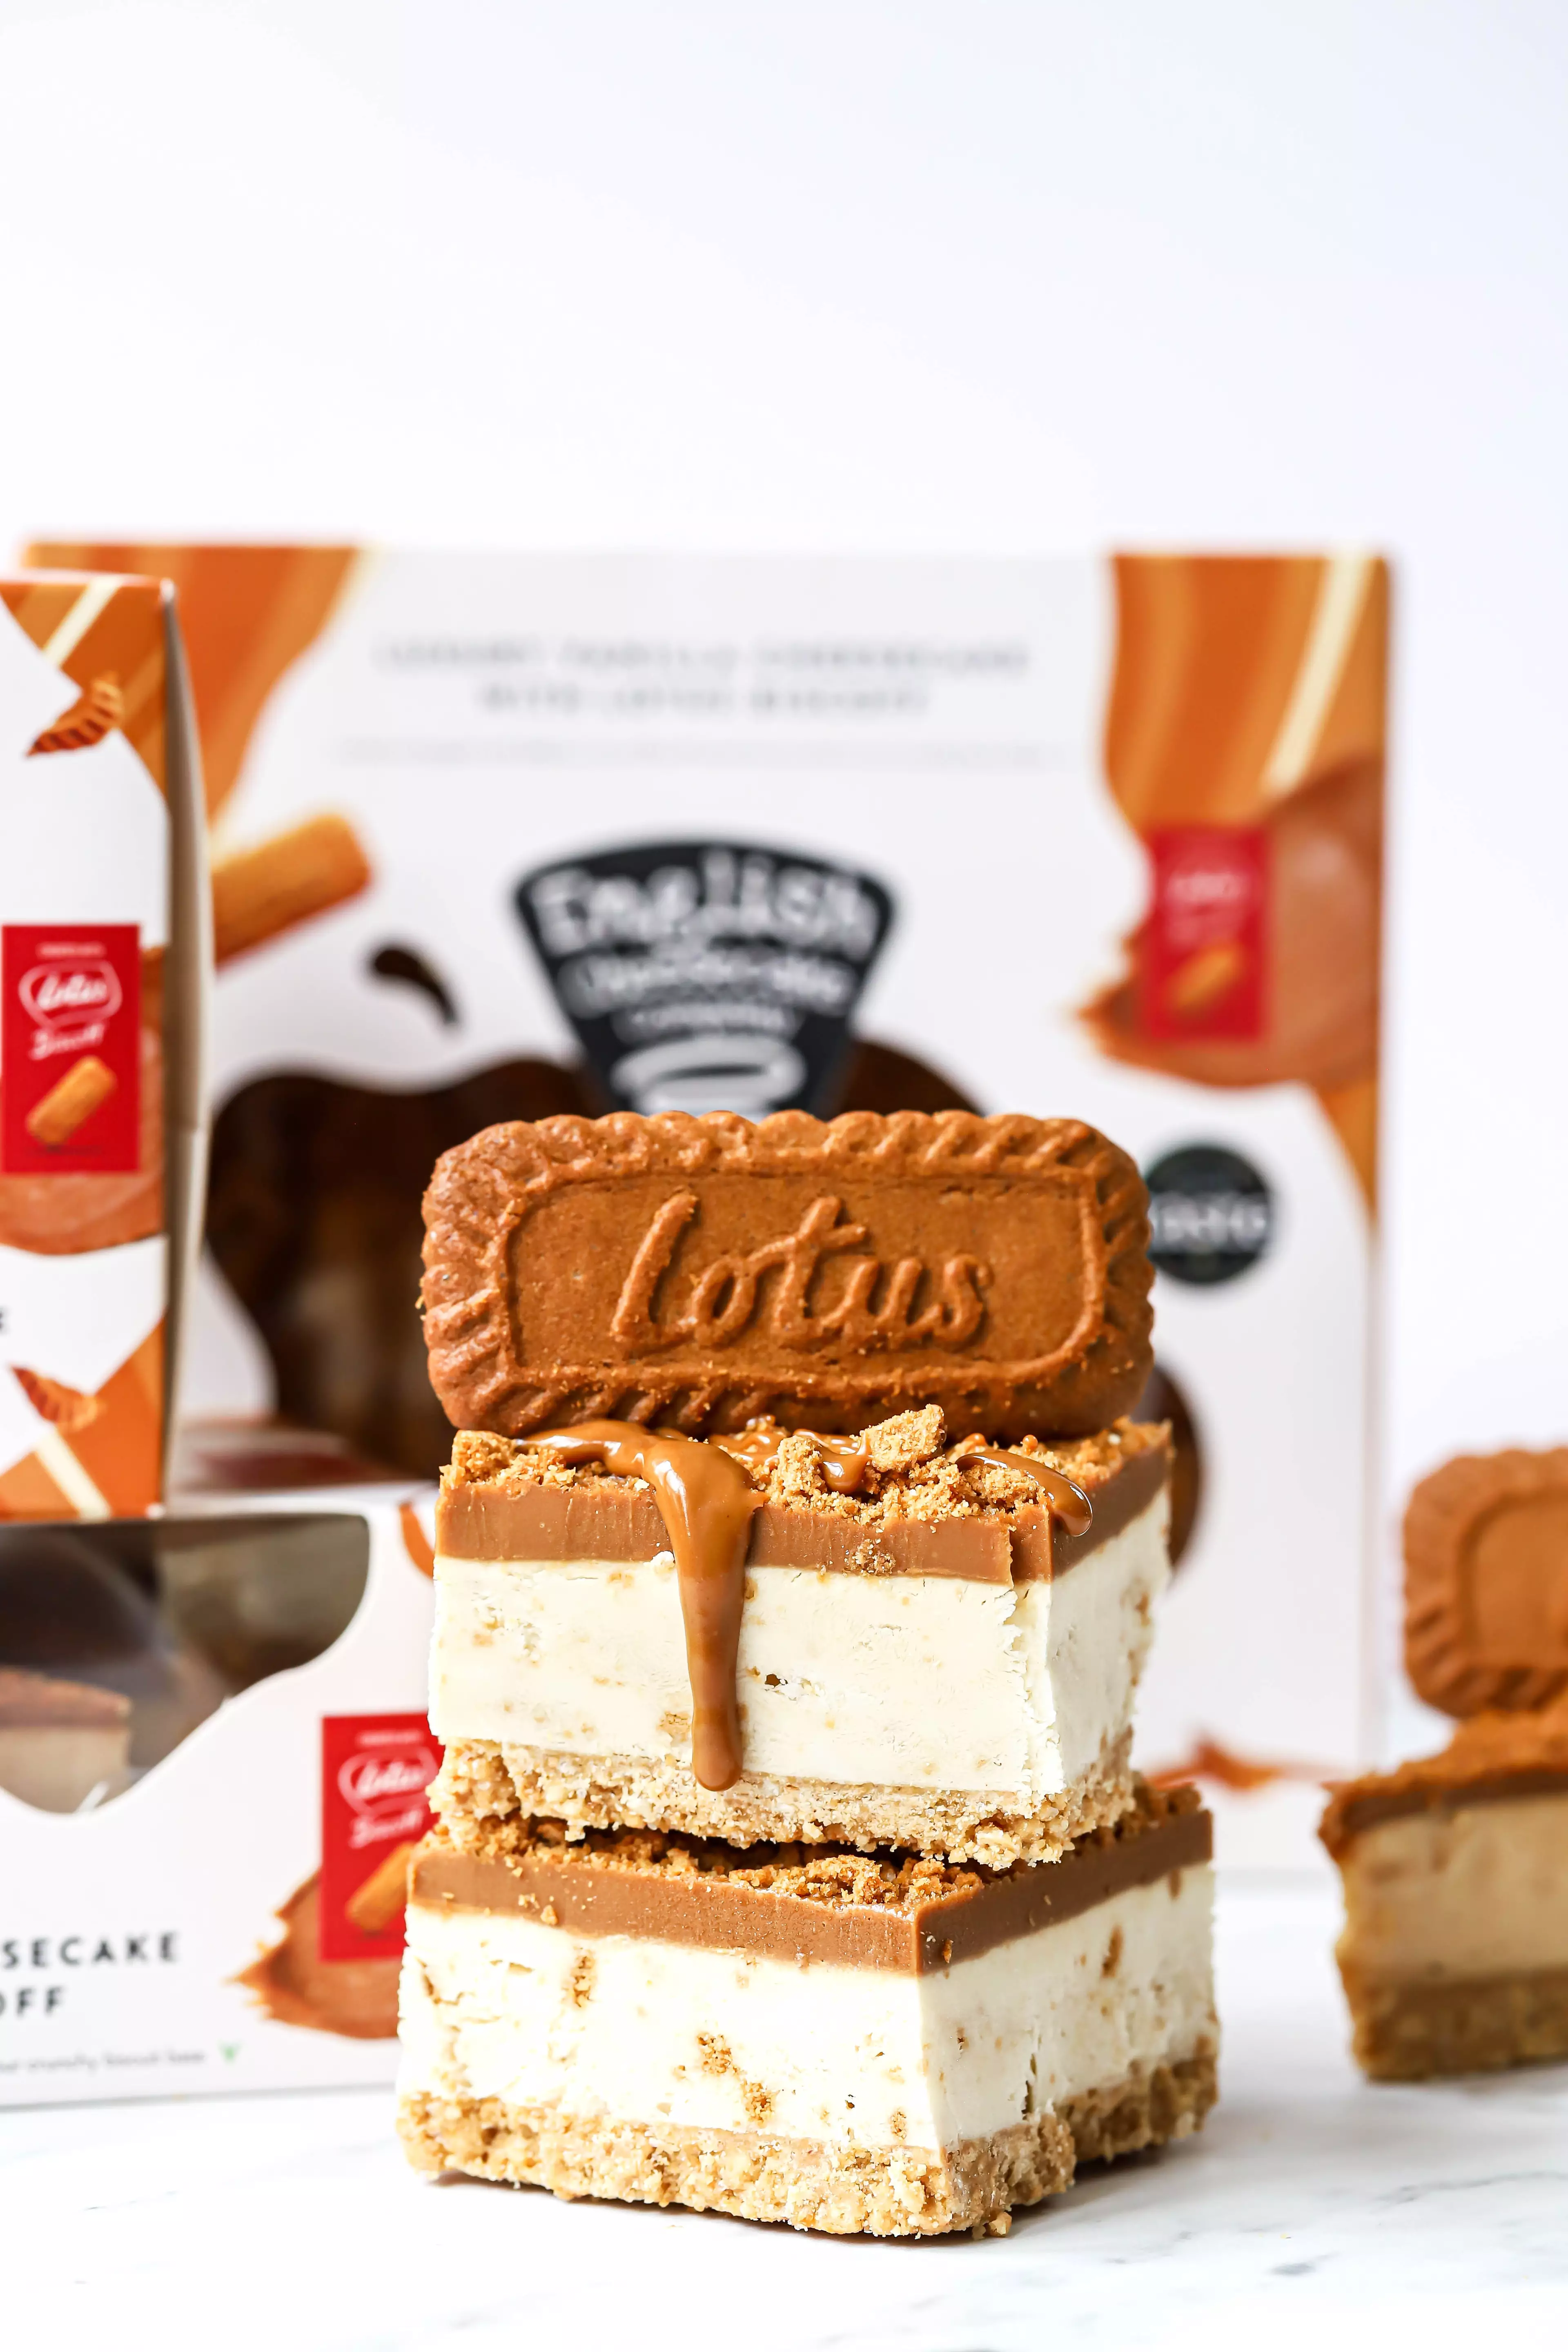 You can find this mouth-watering good online or in stores with Waitrose